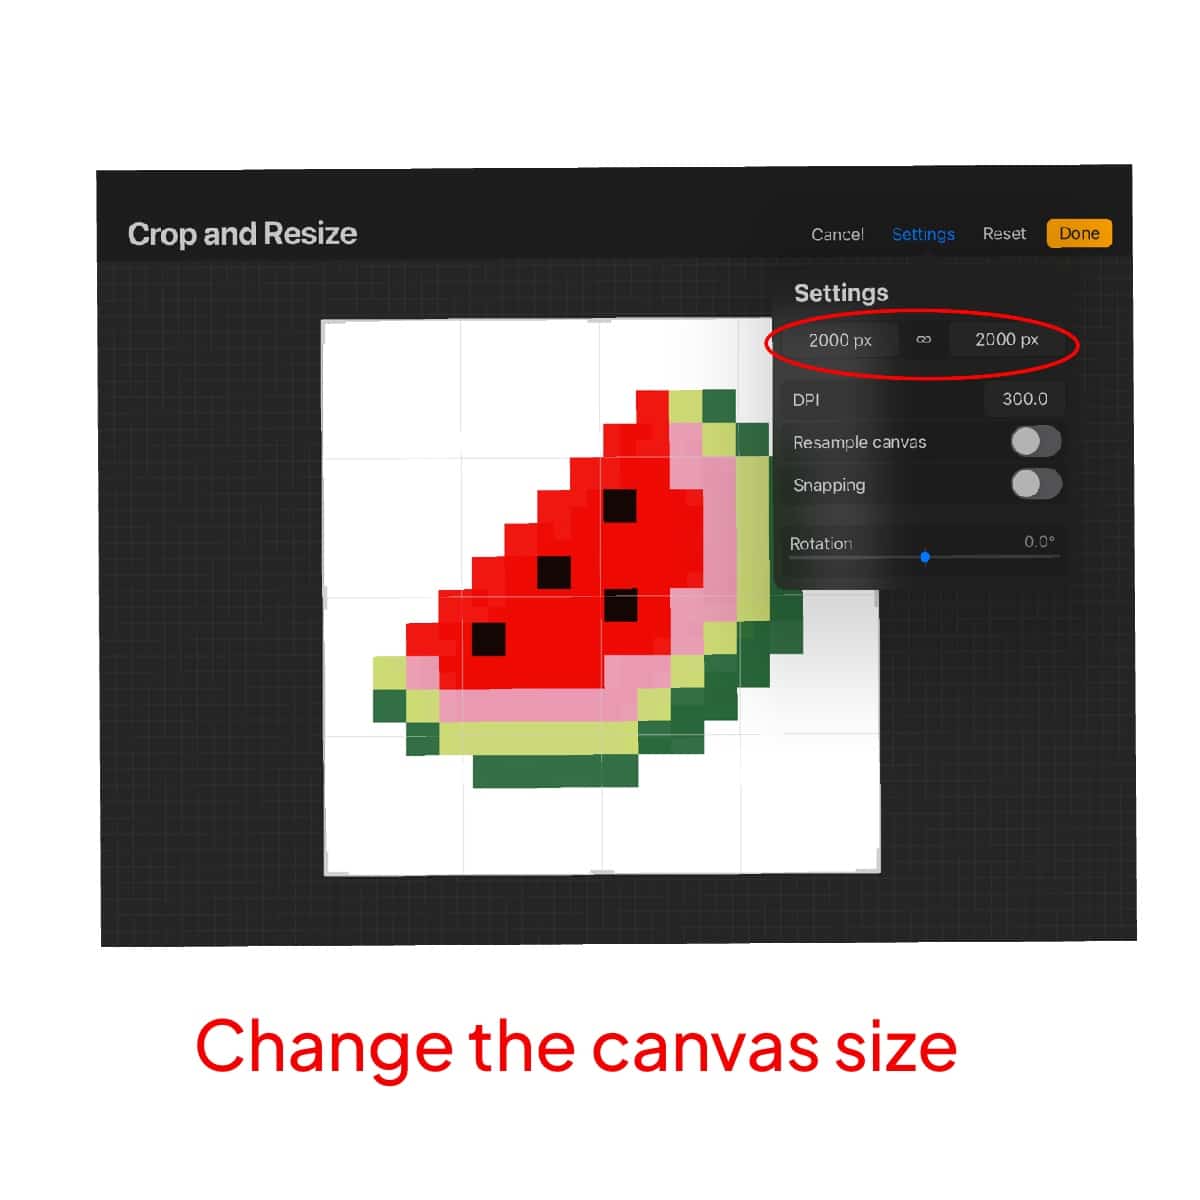 Changing the canvas size